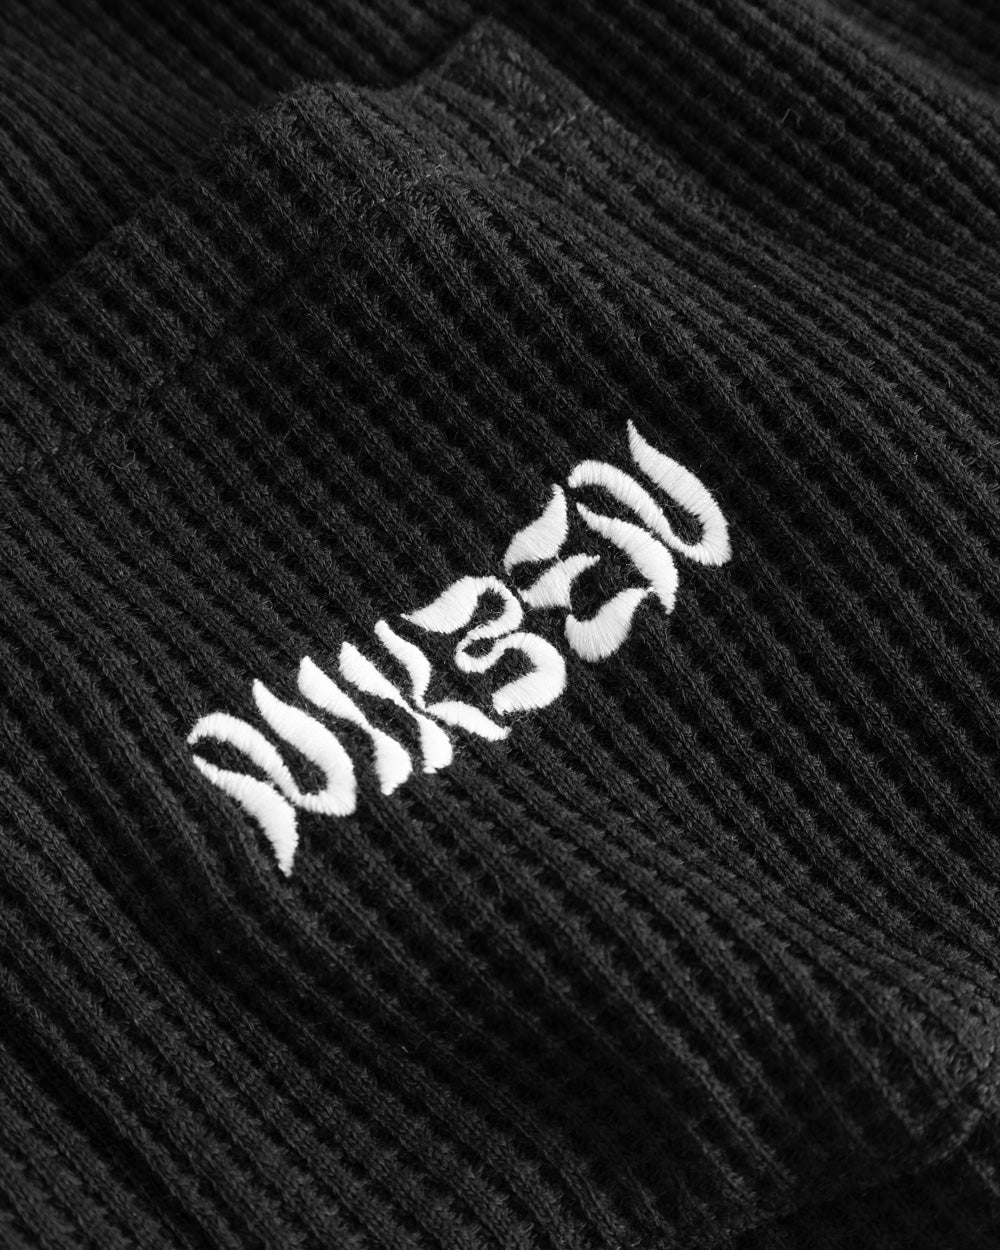 Close-up view of front pocket with stitched white logo on a black waffle-patterned shirt.